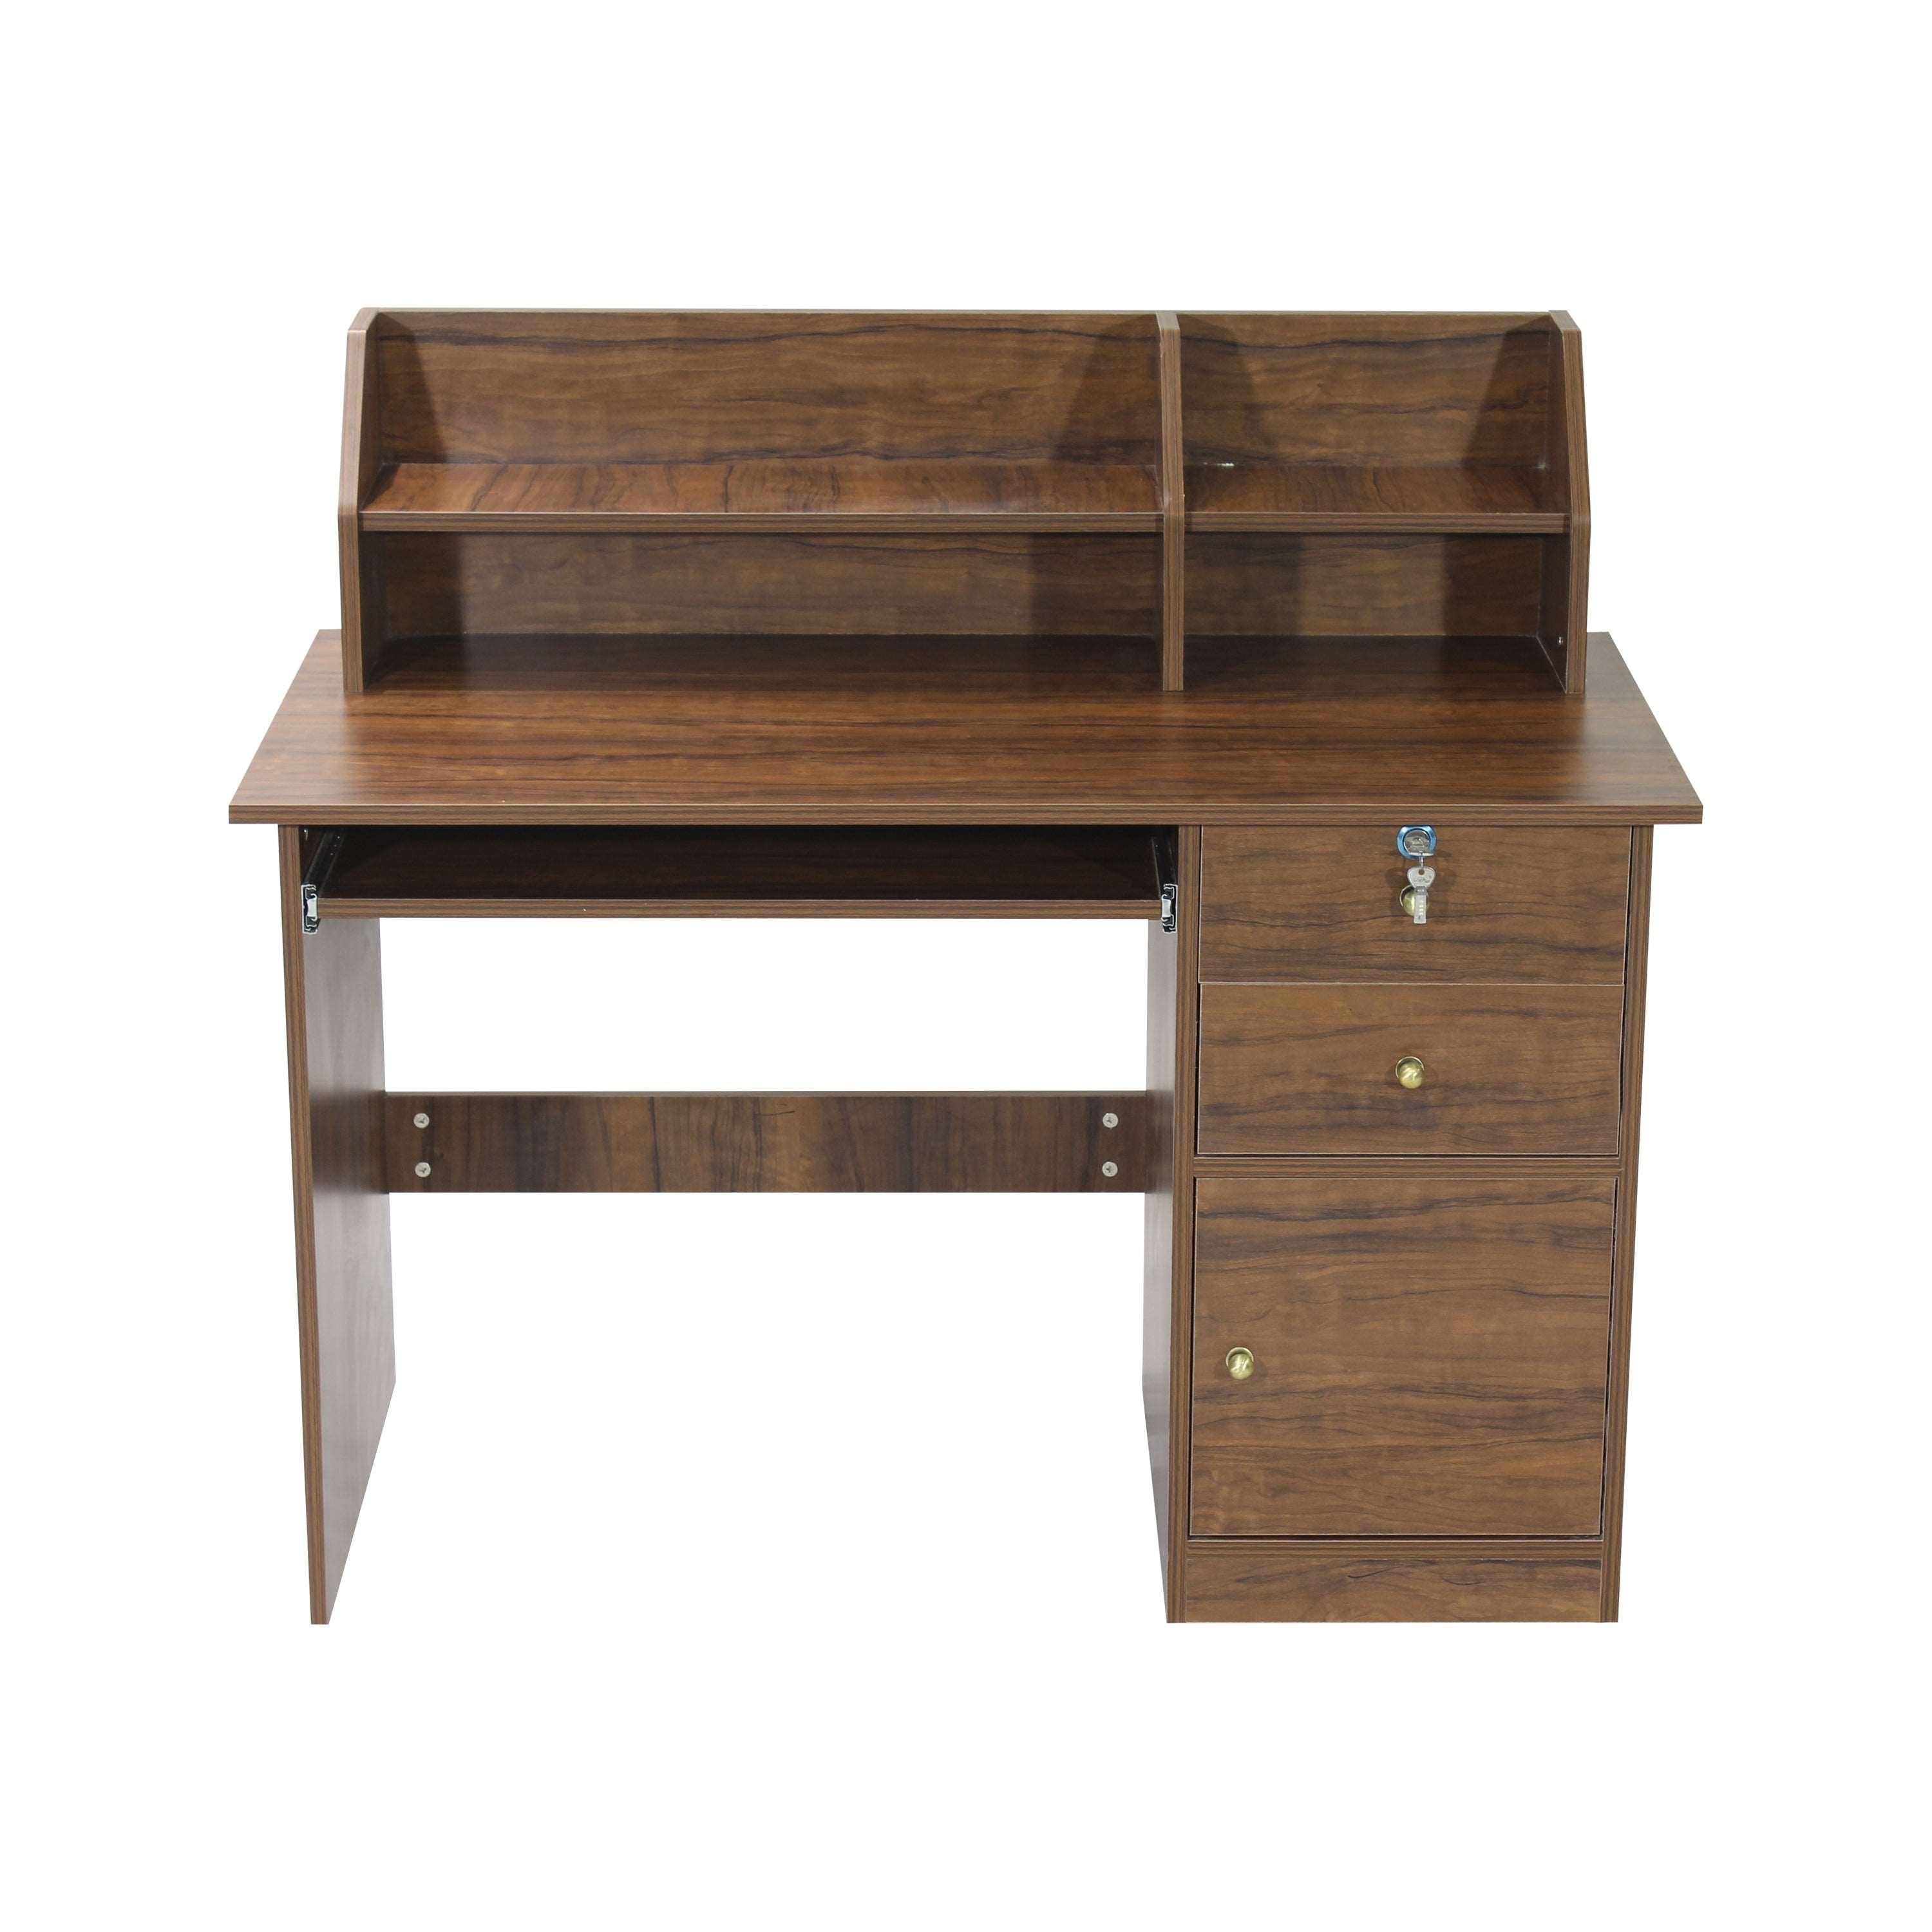 Dario Study Table with Shelf Drawer & Cabinet